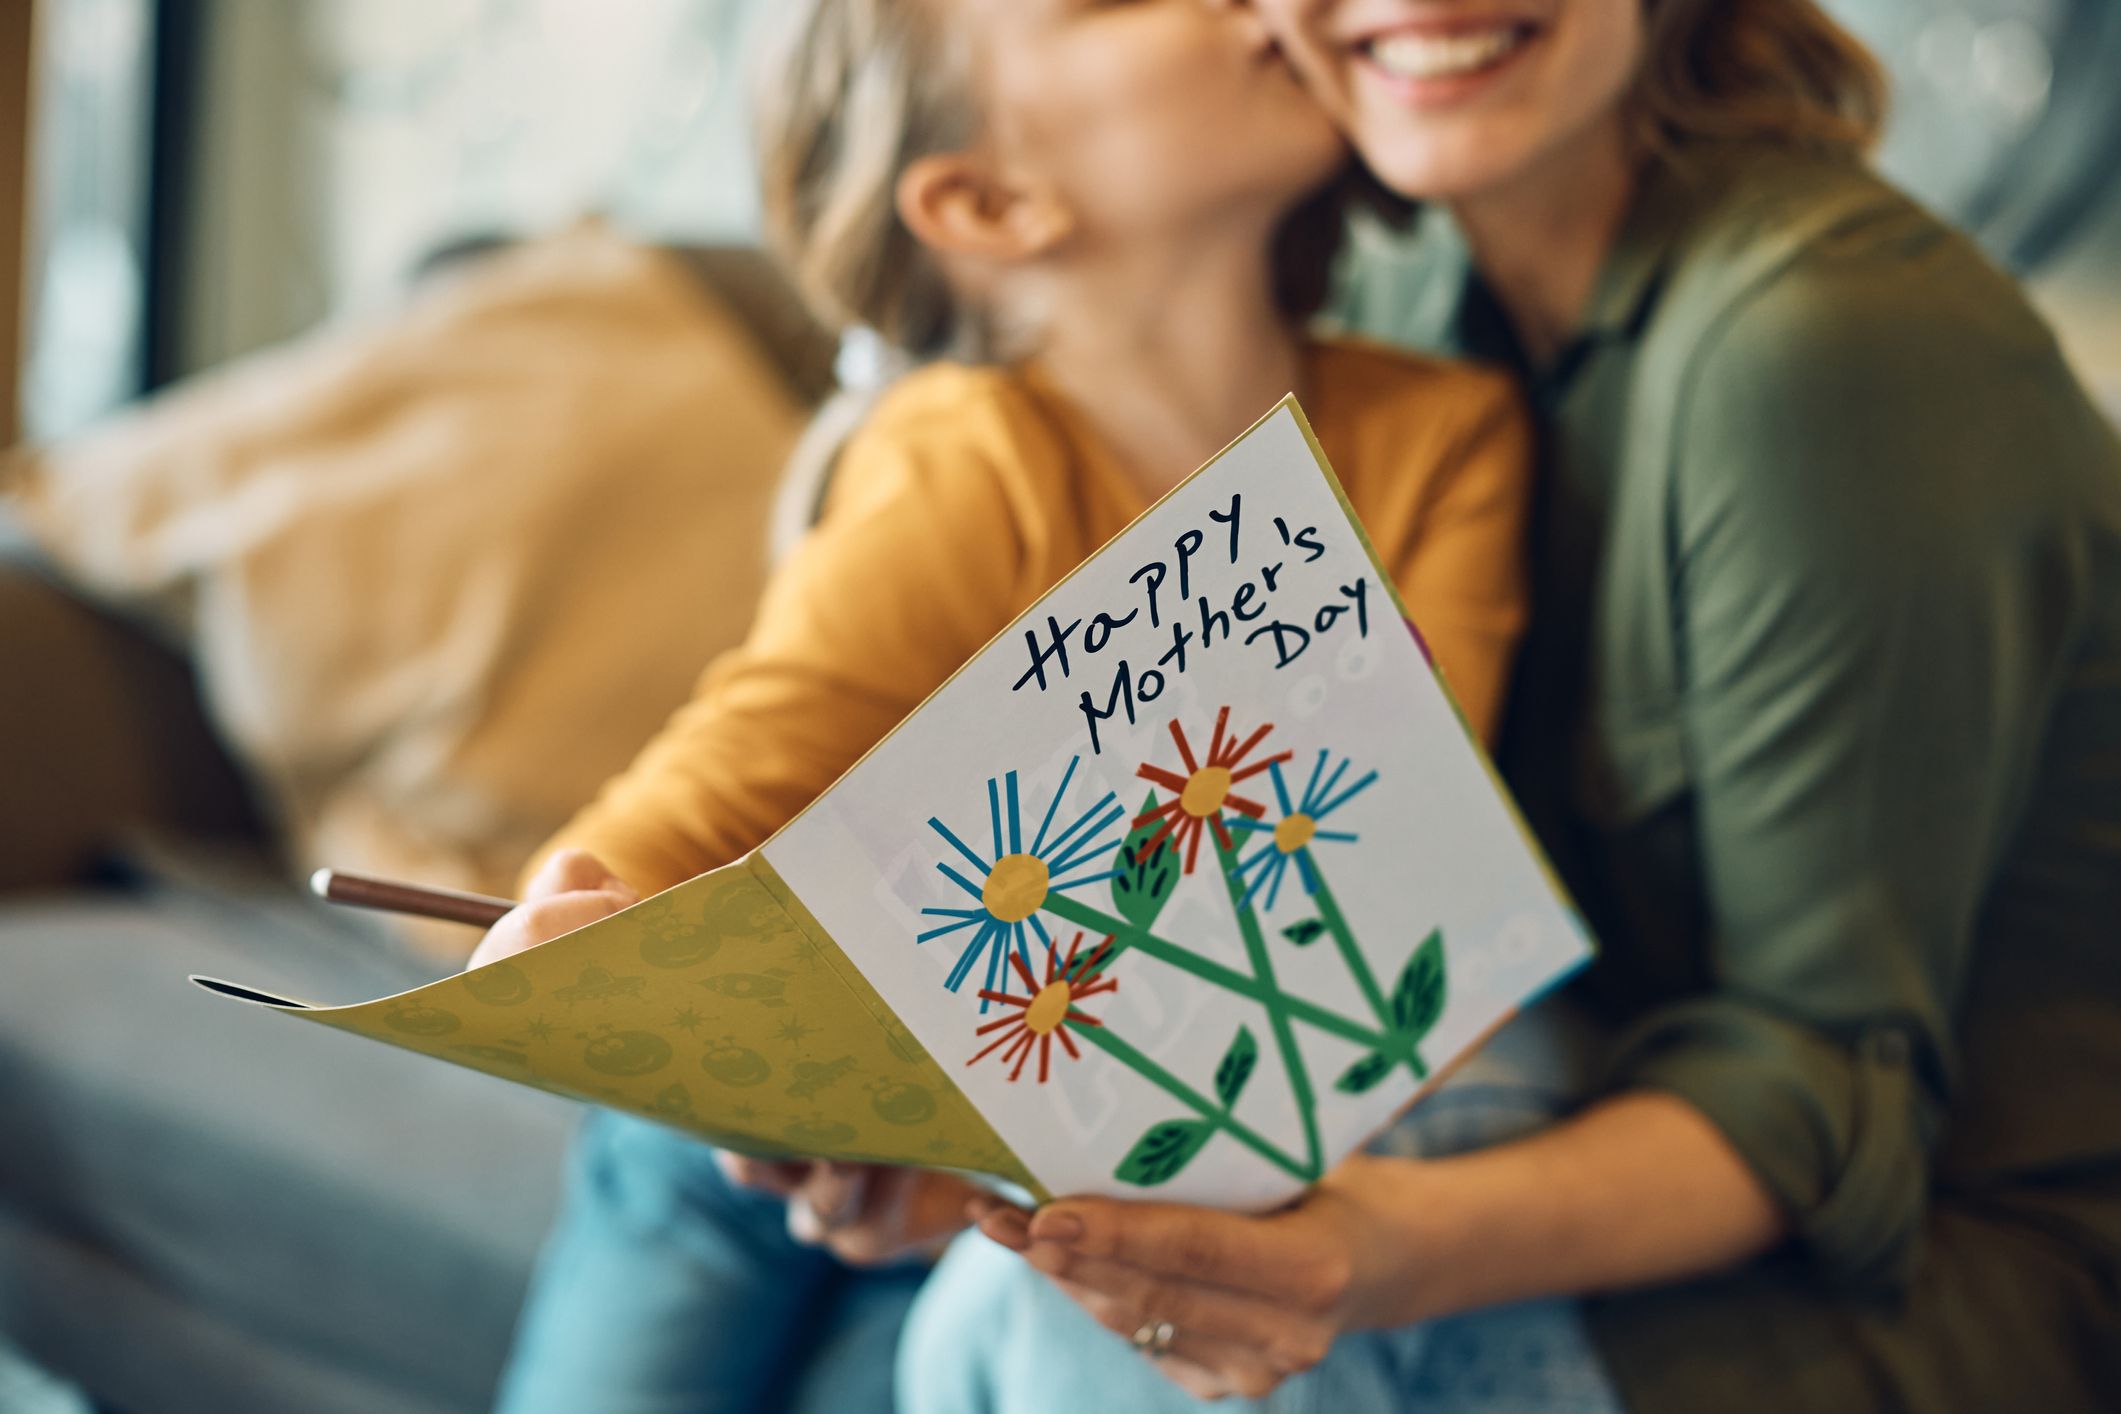 https://hips.hearstapps.com/hmg-prod/images/close-up-of-woman-receiving-mothers-day-greeting-royalty-free-image-1680728374.jpg